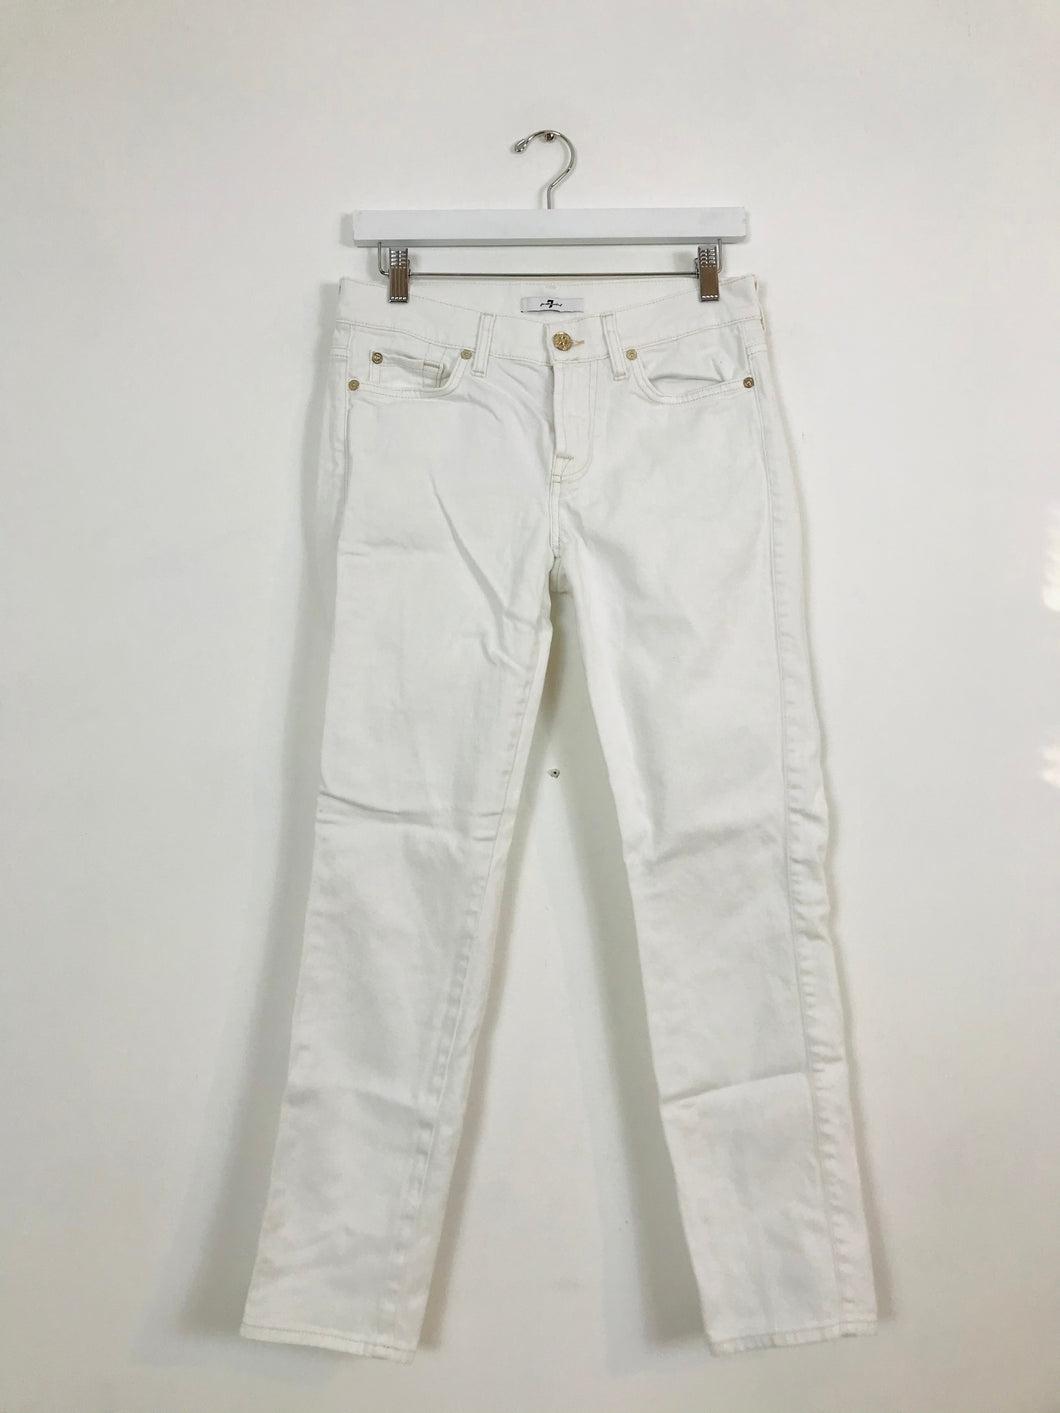 7 For All Mankind Women’s Skinny Cropped Jeans | 27 UK10 | White